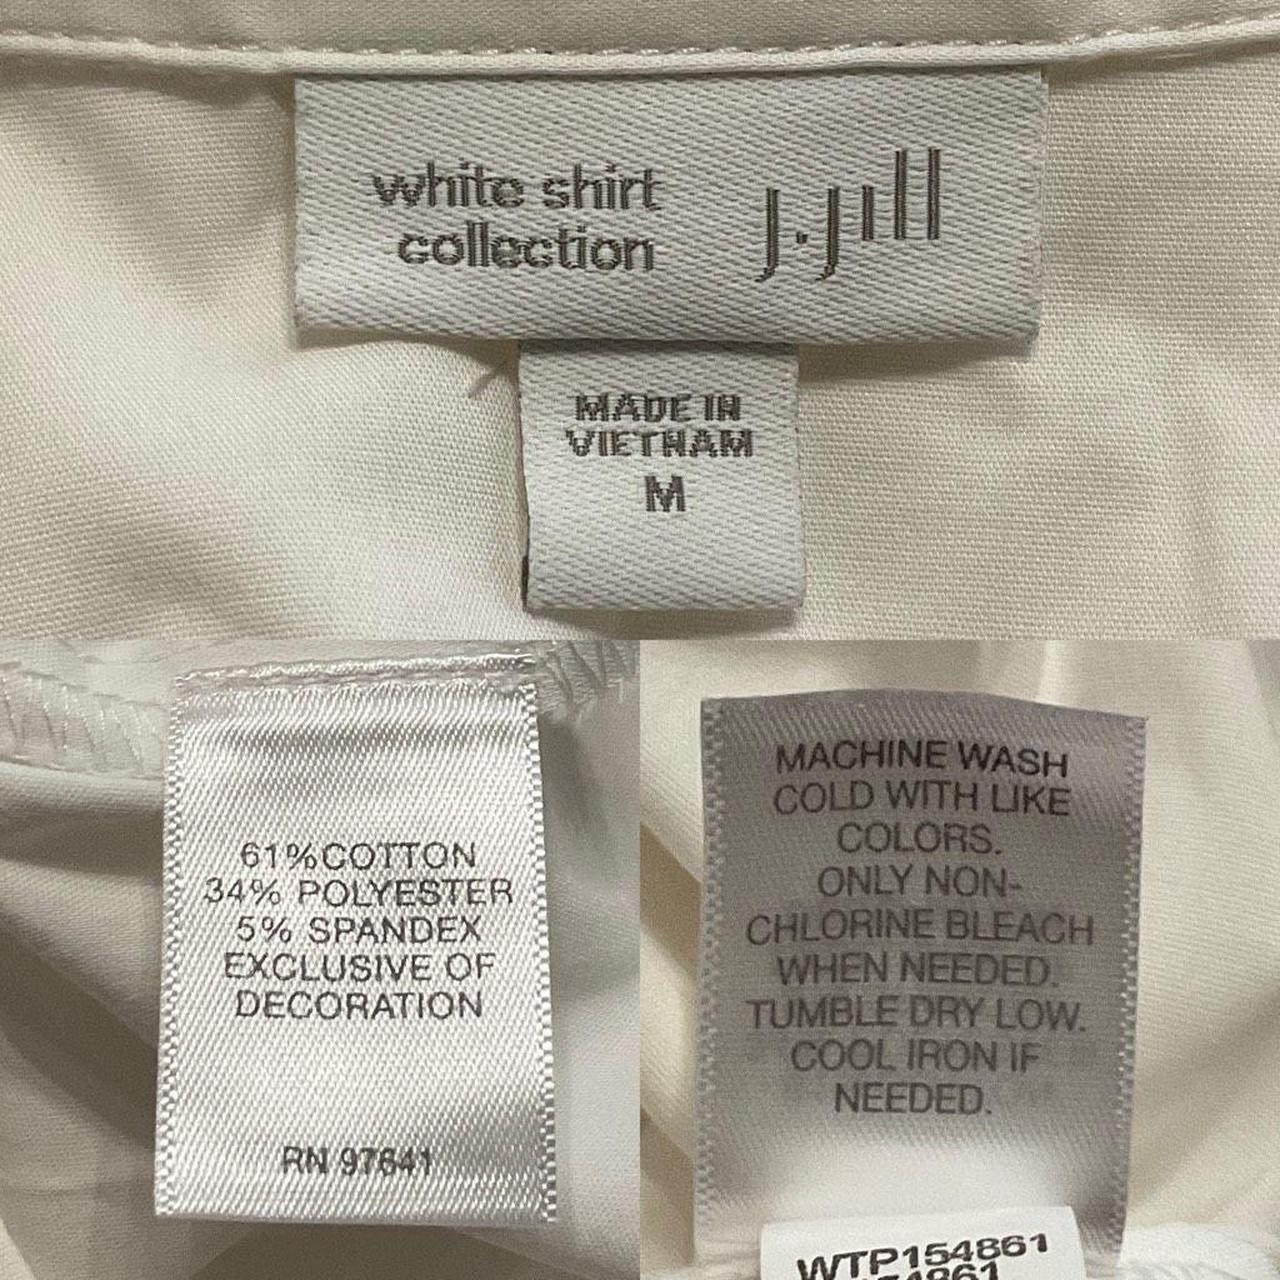 J Jill White Shirt Collection Top Size Small Cotton Blend Embroidered Puff  Sleev